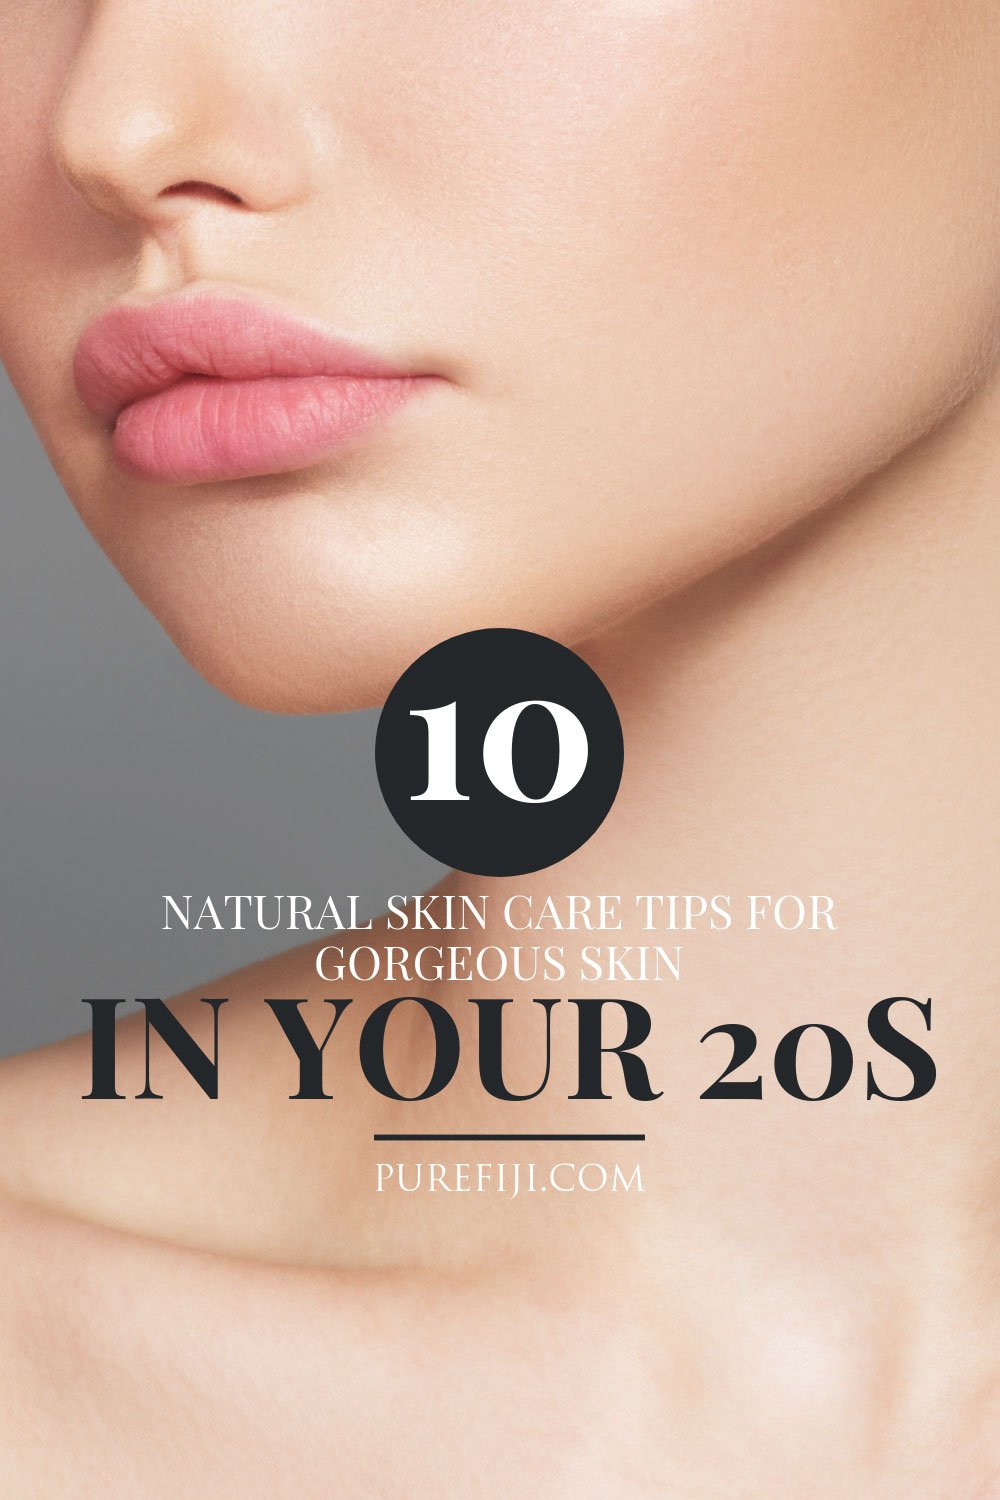 10 Natural Skin Care Tips for Gorgeous Skin in Your 20s